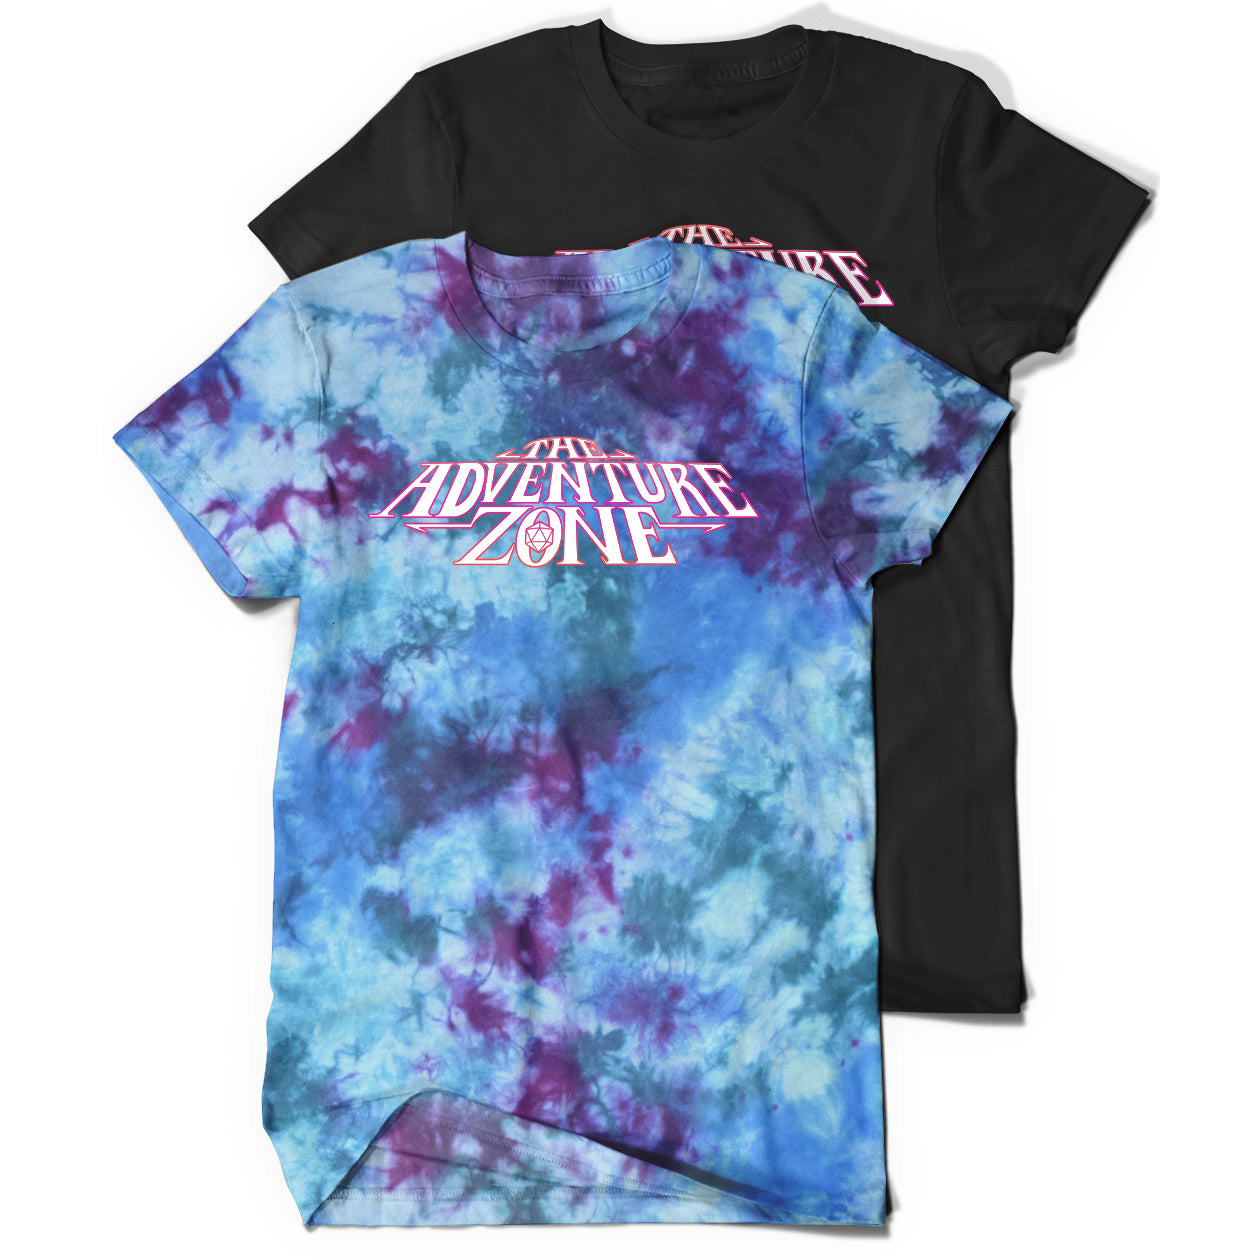 Two t-shirts that say “The Adventure Zone” in white and pink. The front shirt is a blue and indigo tie-dye and the back shirt is a plain black.